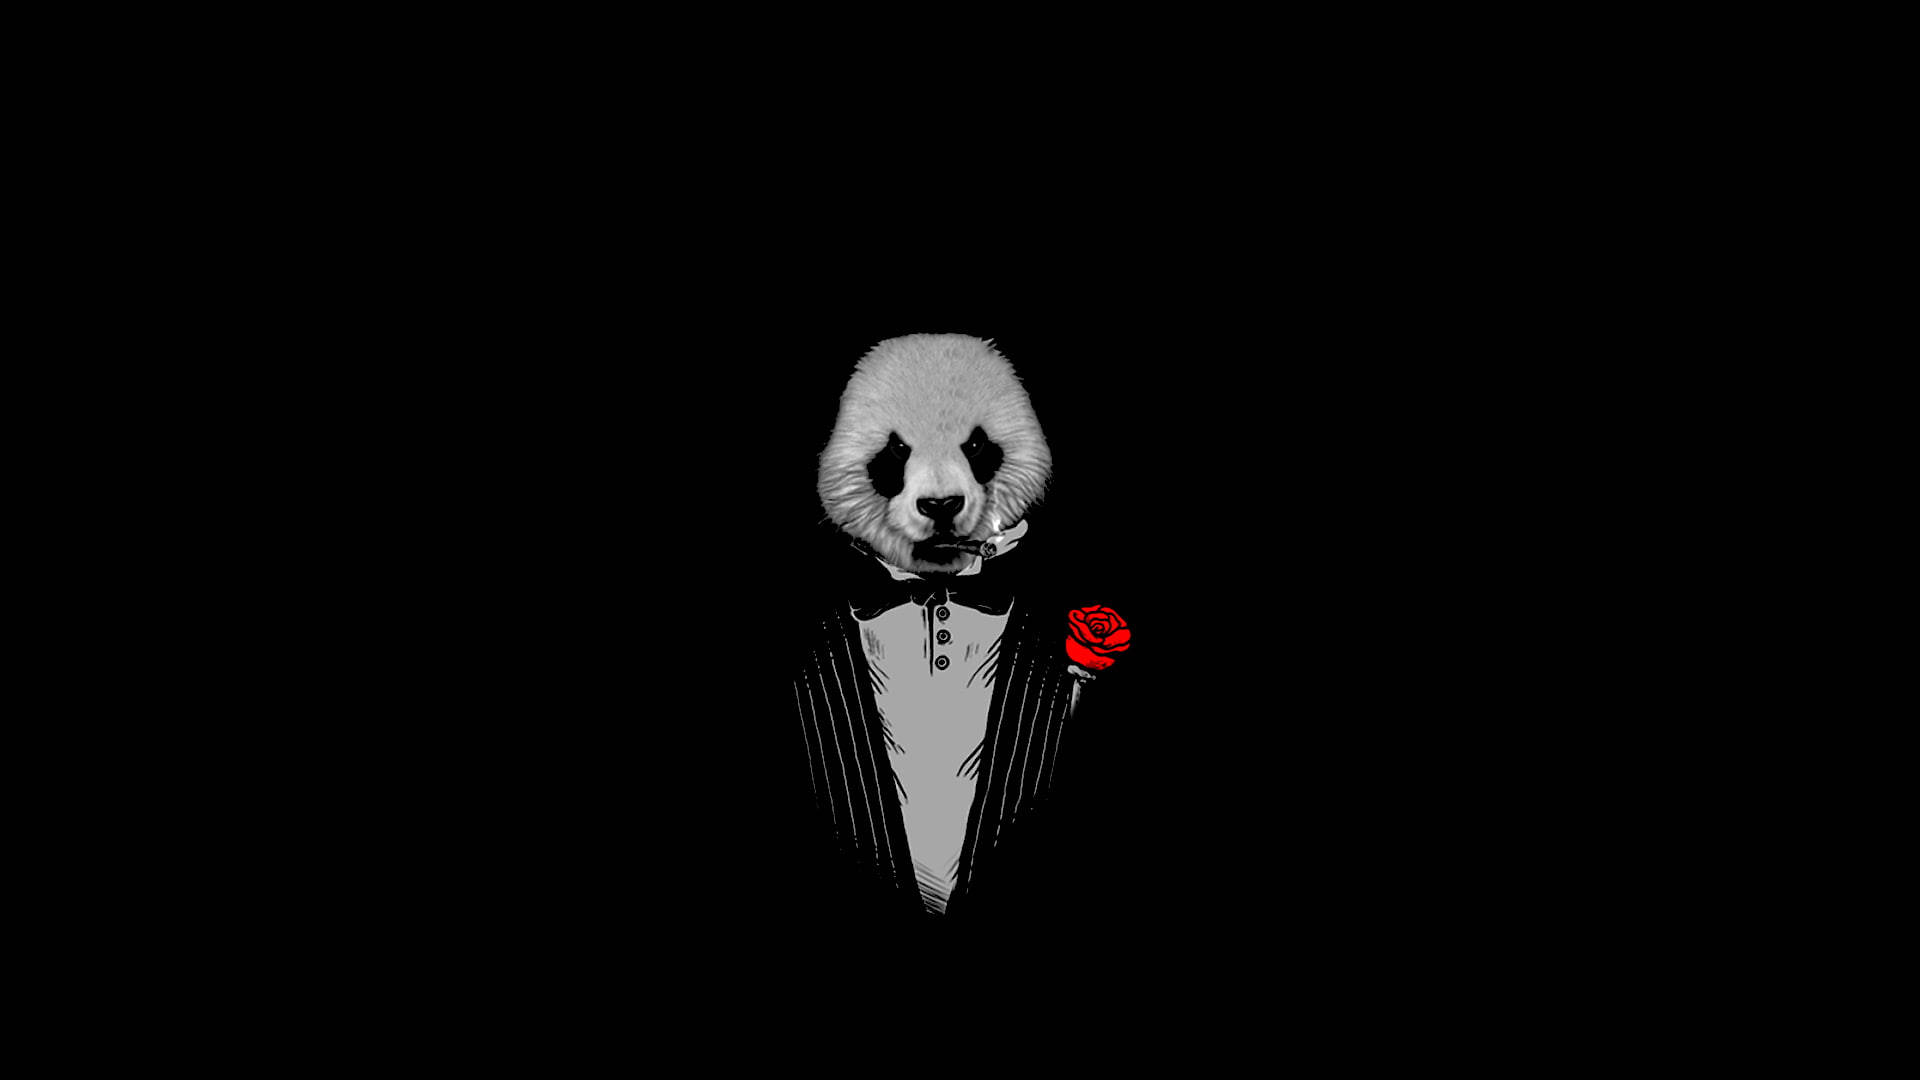 The Godfather Panda In Suit Wallpaper